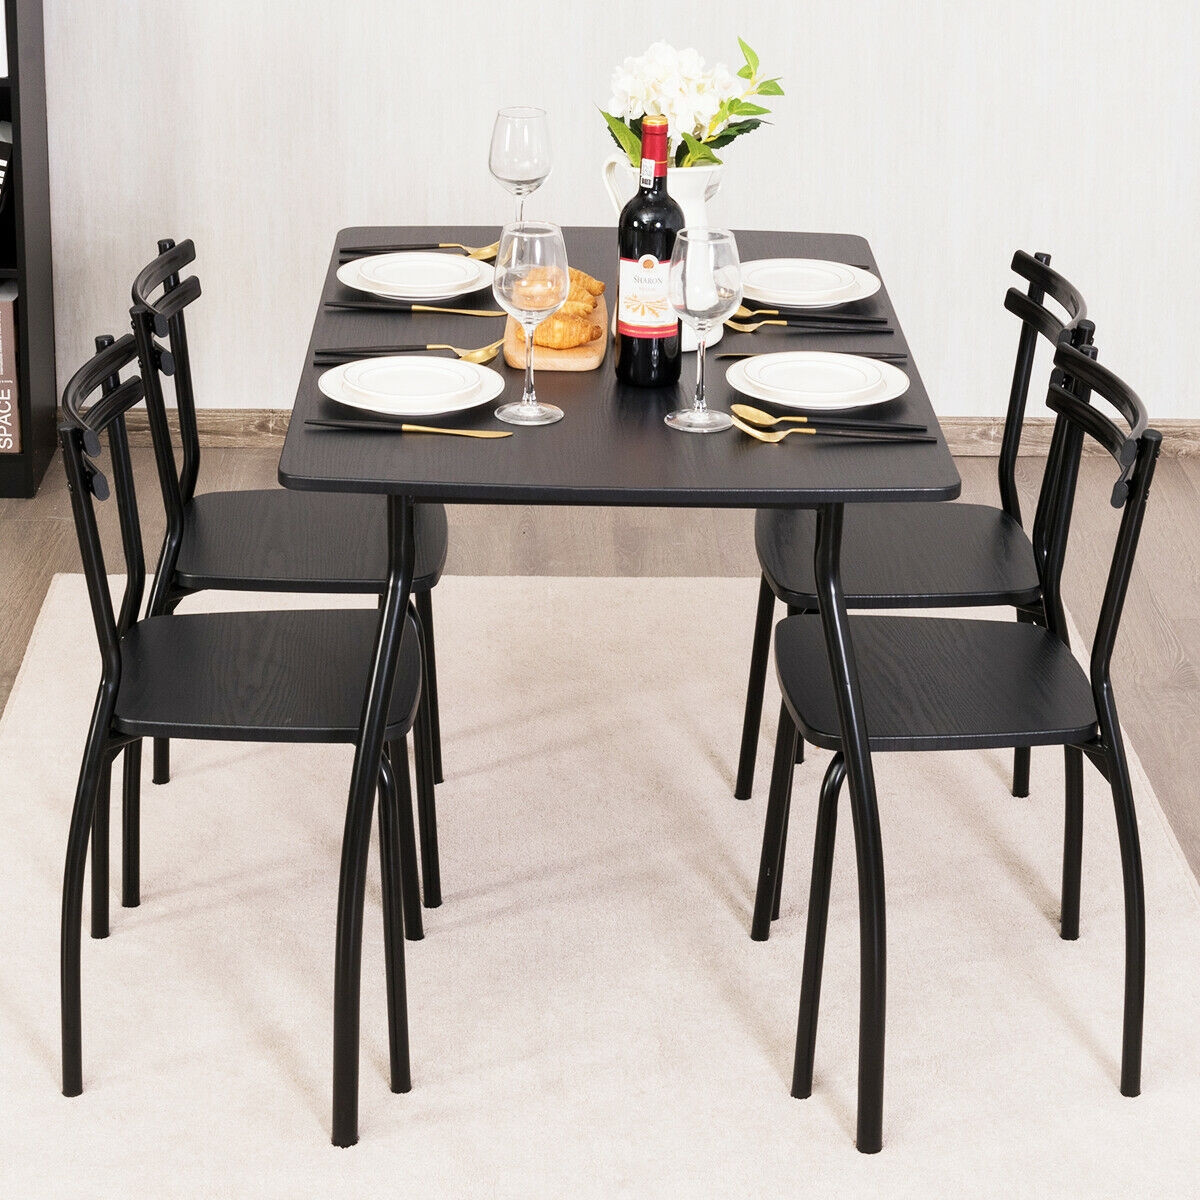 Black 5 Pcs Dining Set Table And 4 Chairs